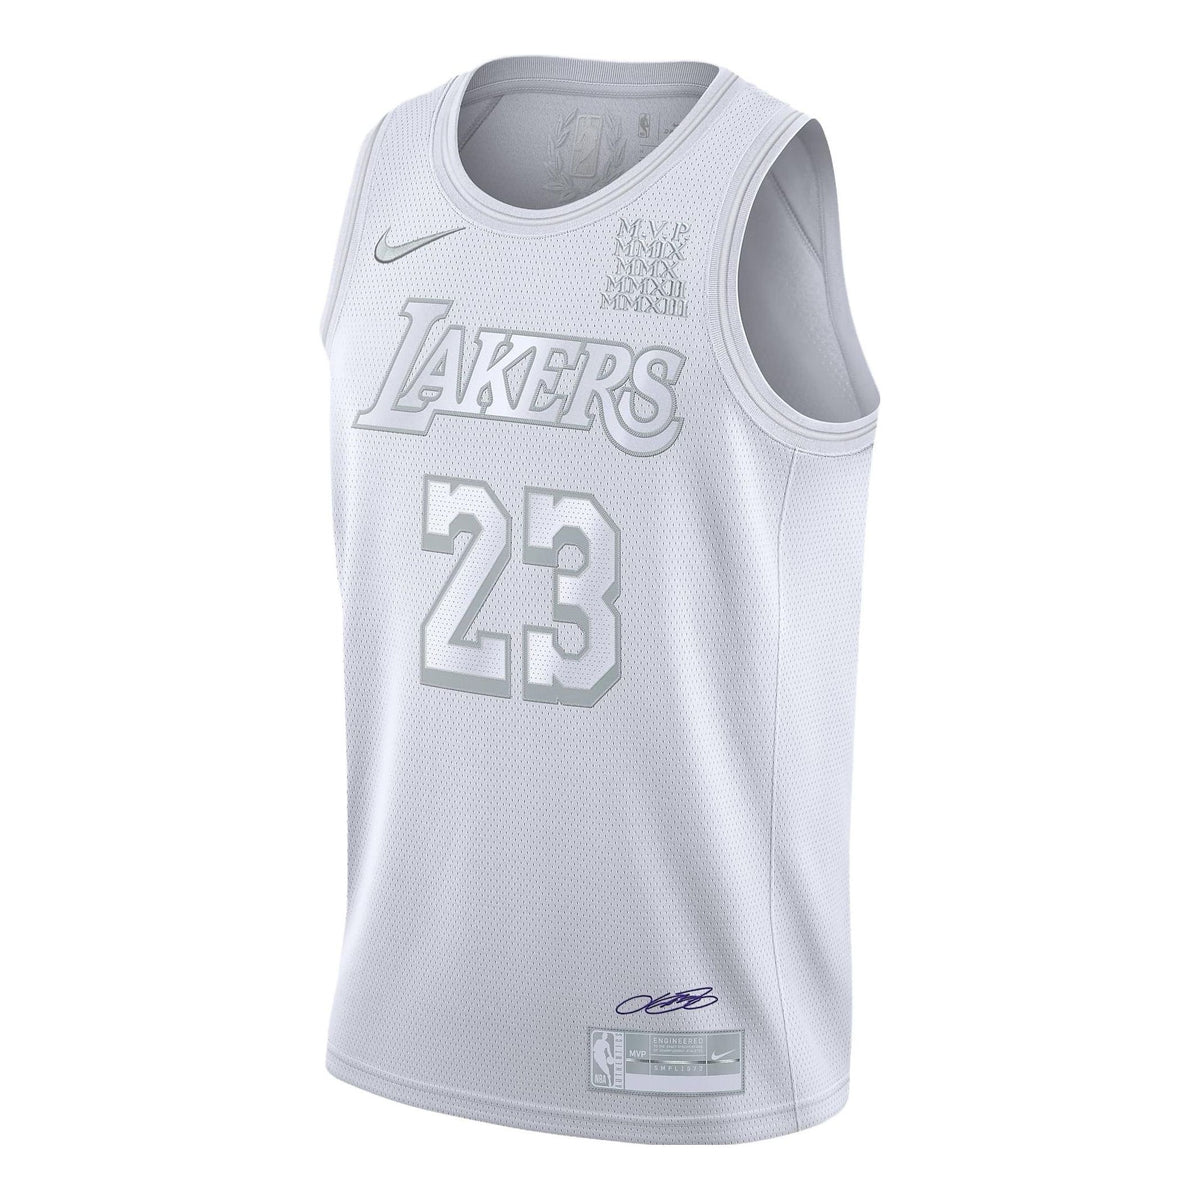 russell westbrook lakers jersey white